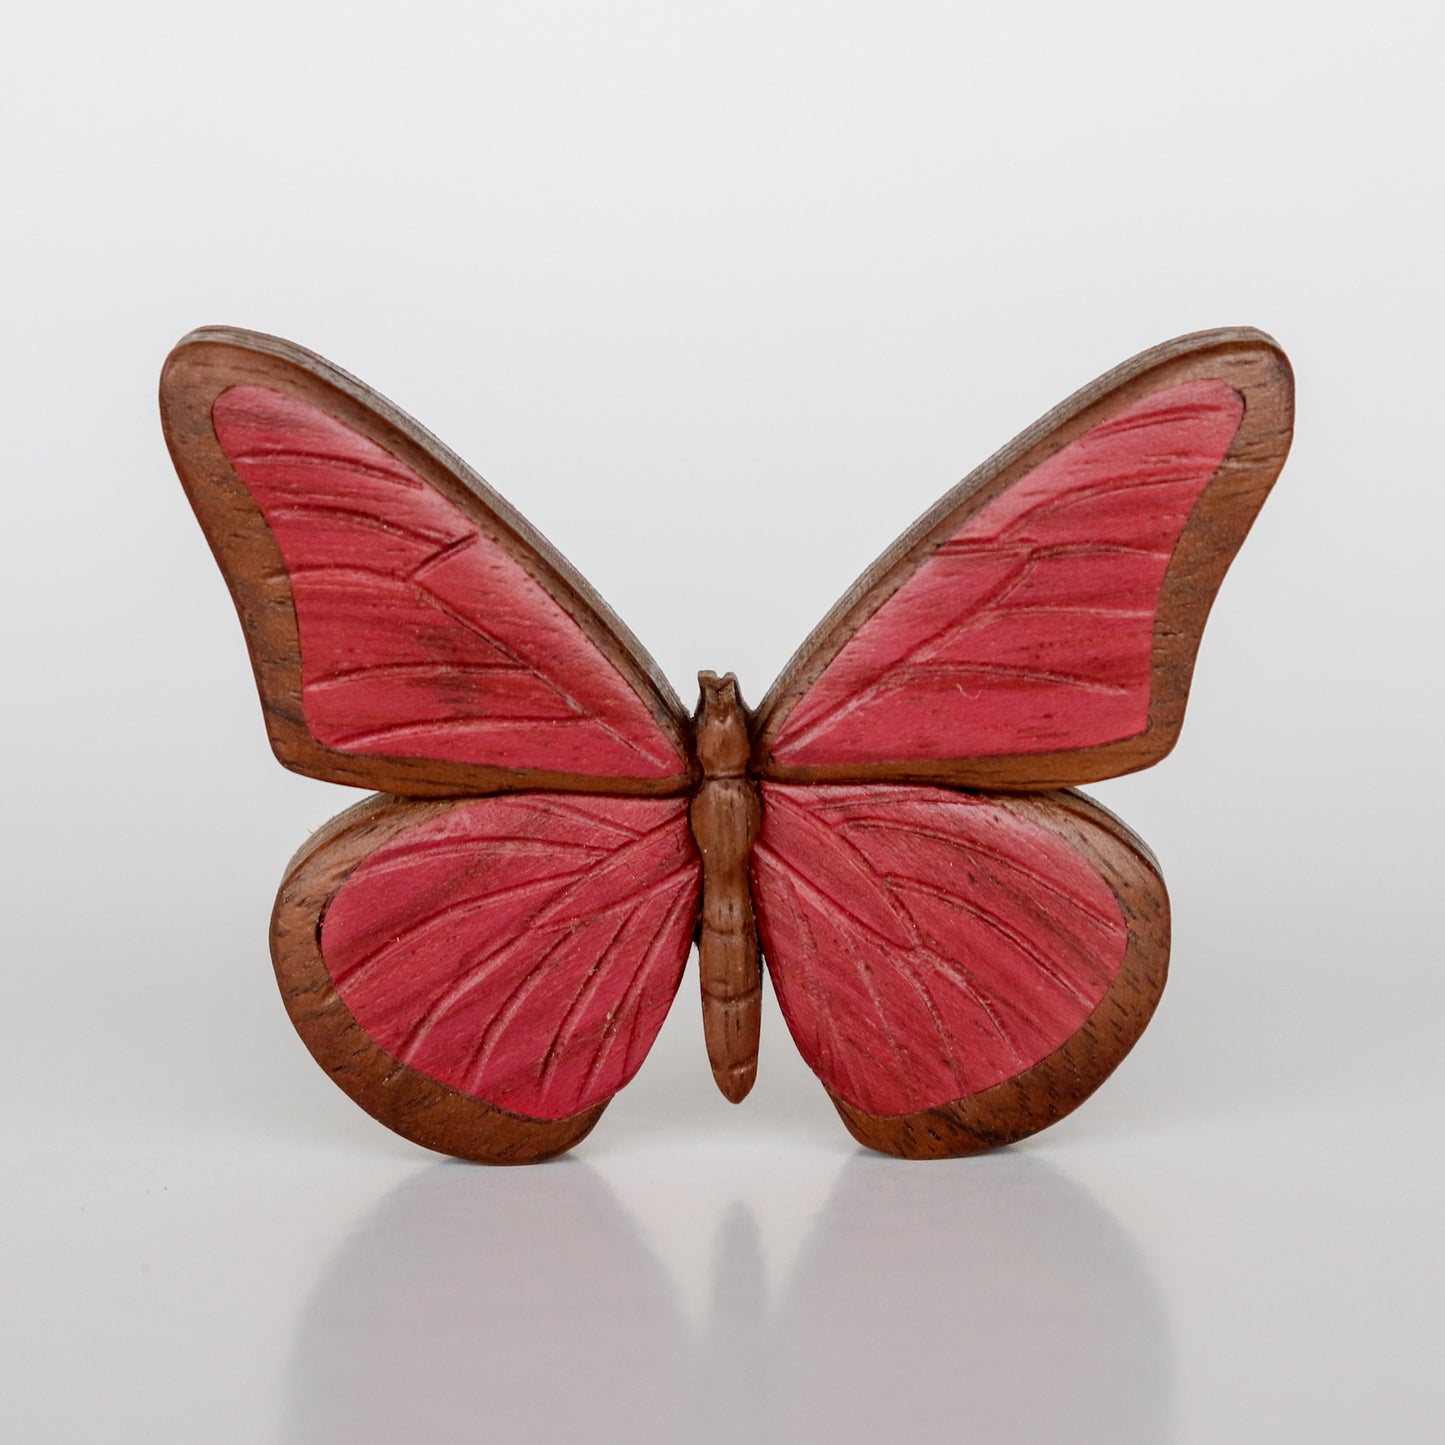 Butterfly Magnet / Ornament